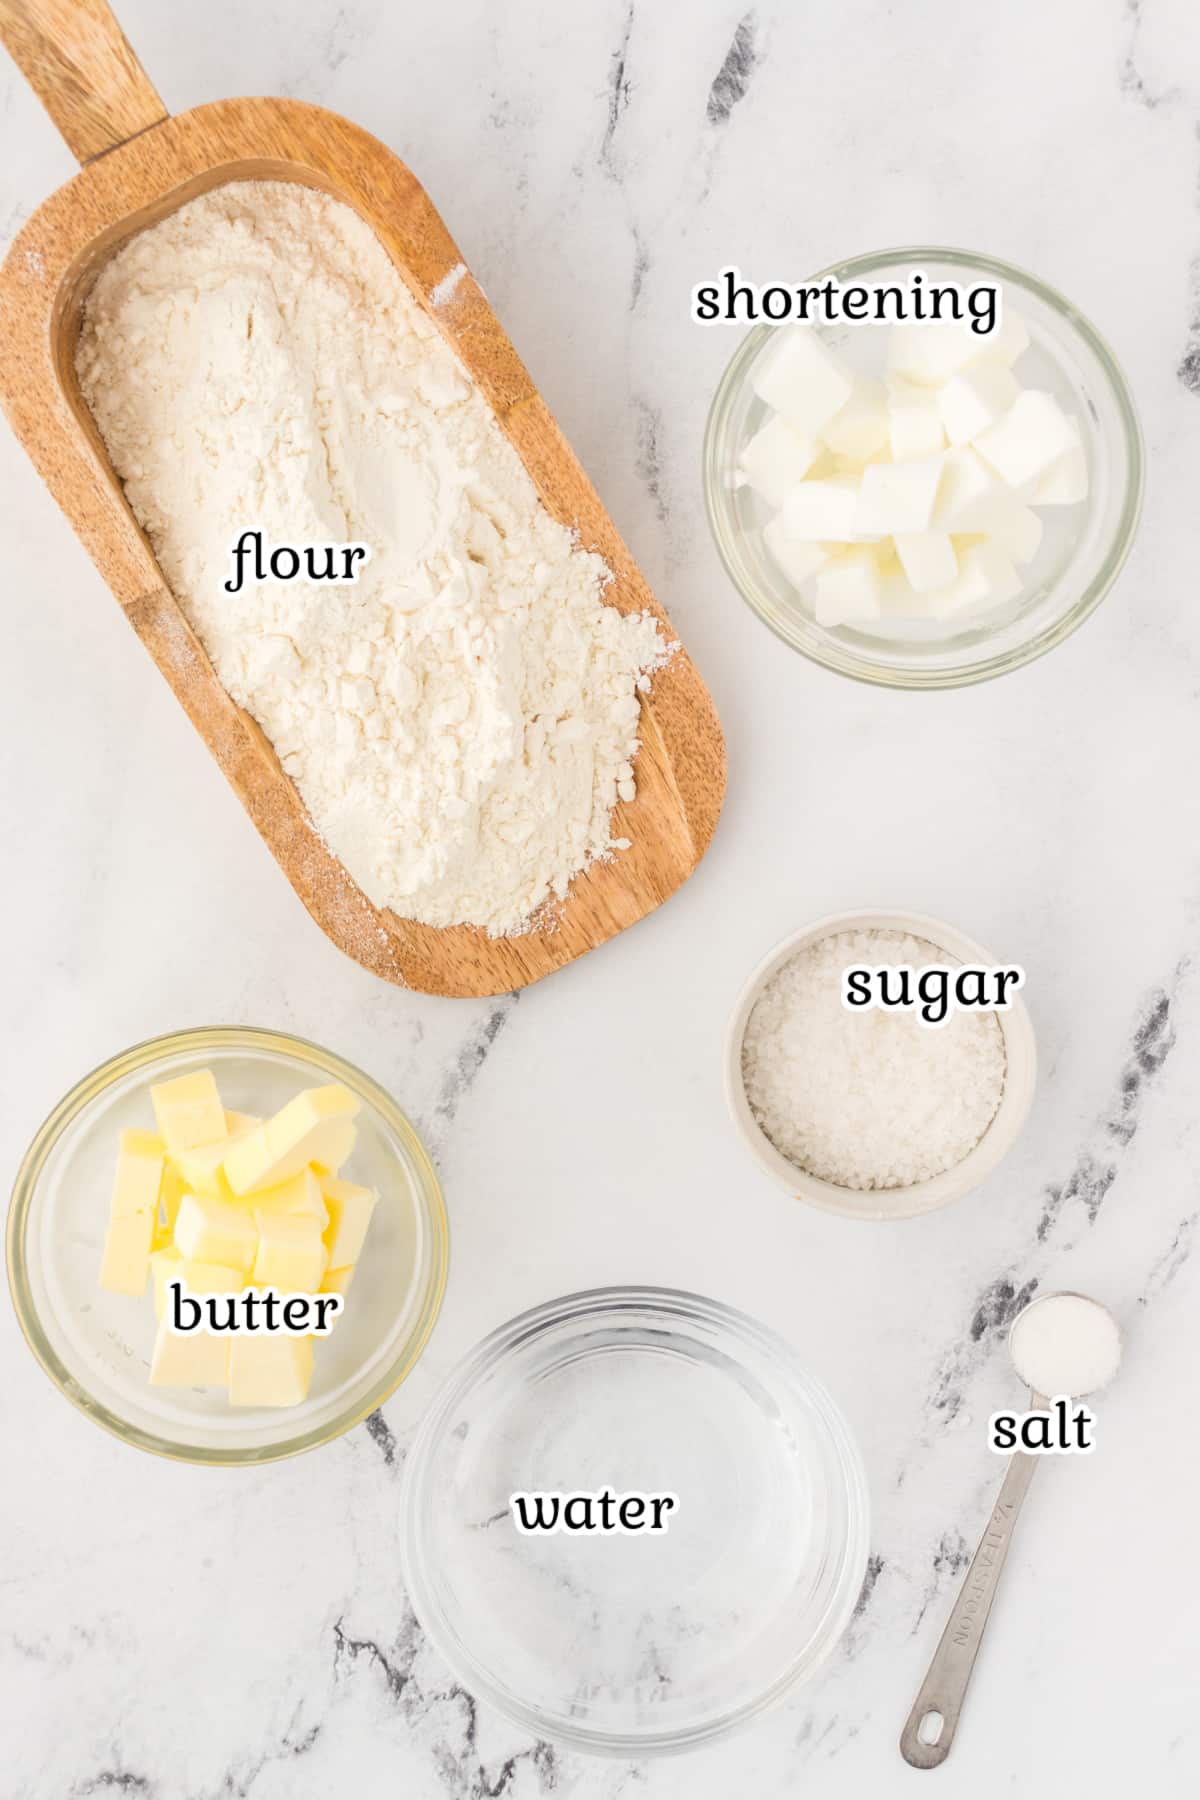 Pie ingredients with text overlay.